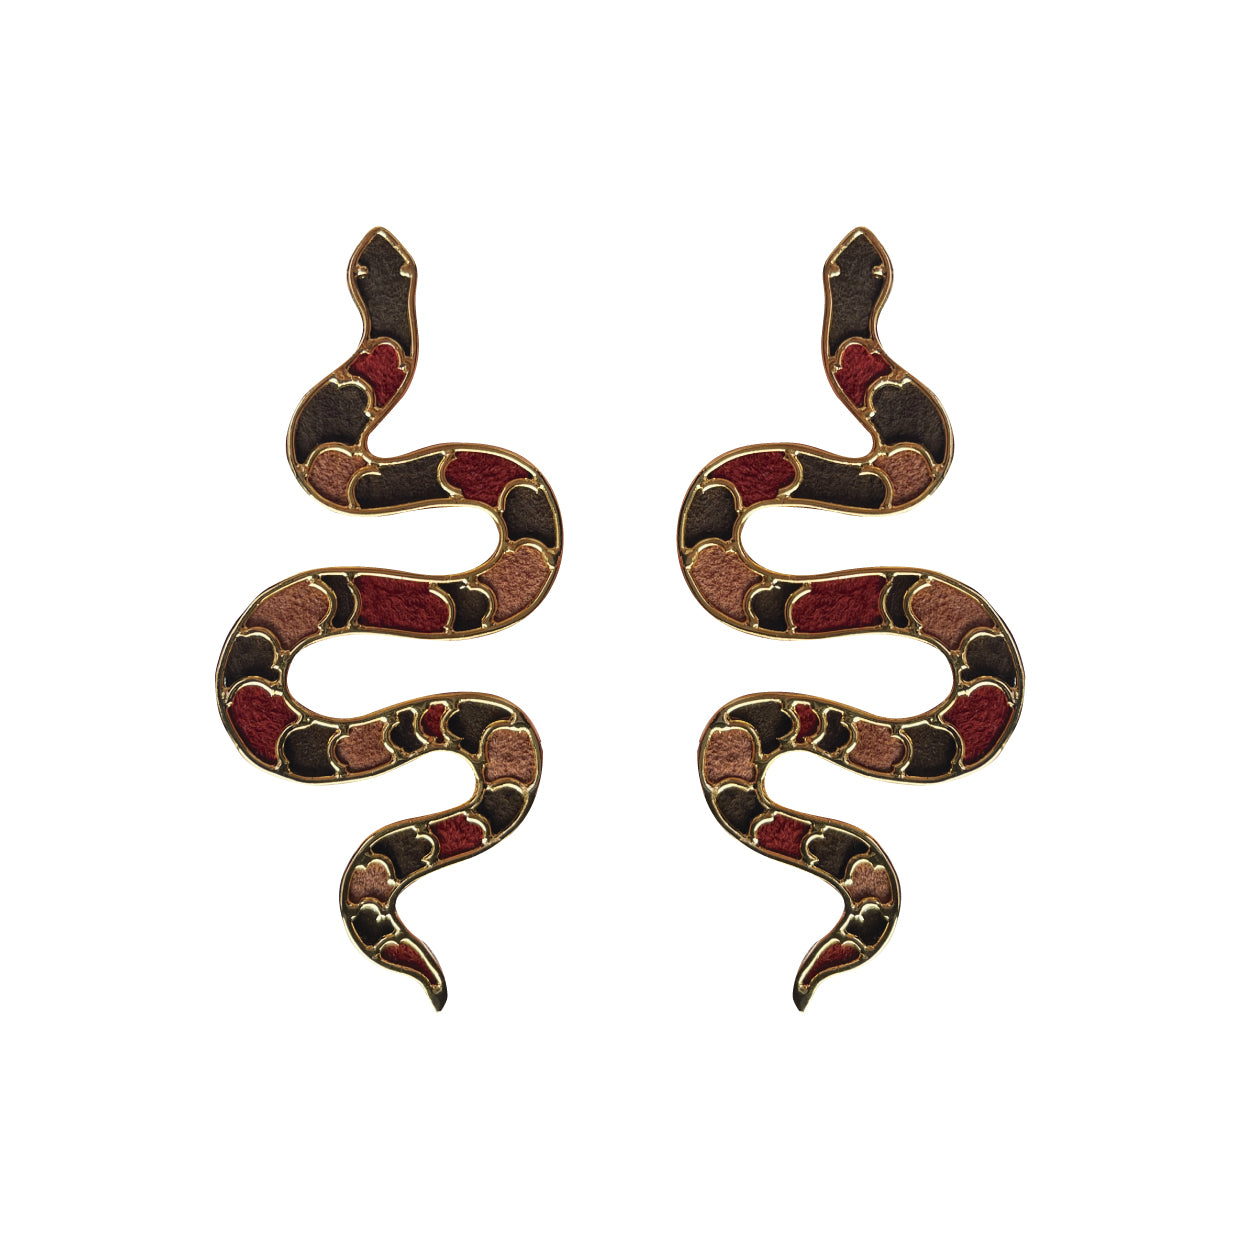 Serpent Earrings by Amulettos